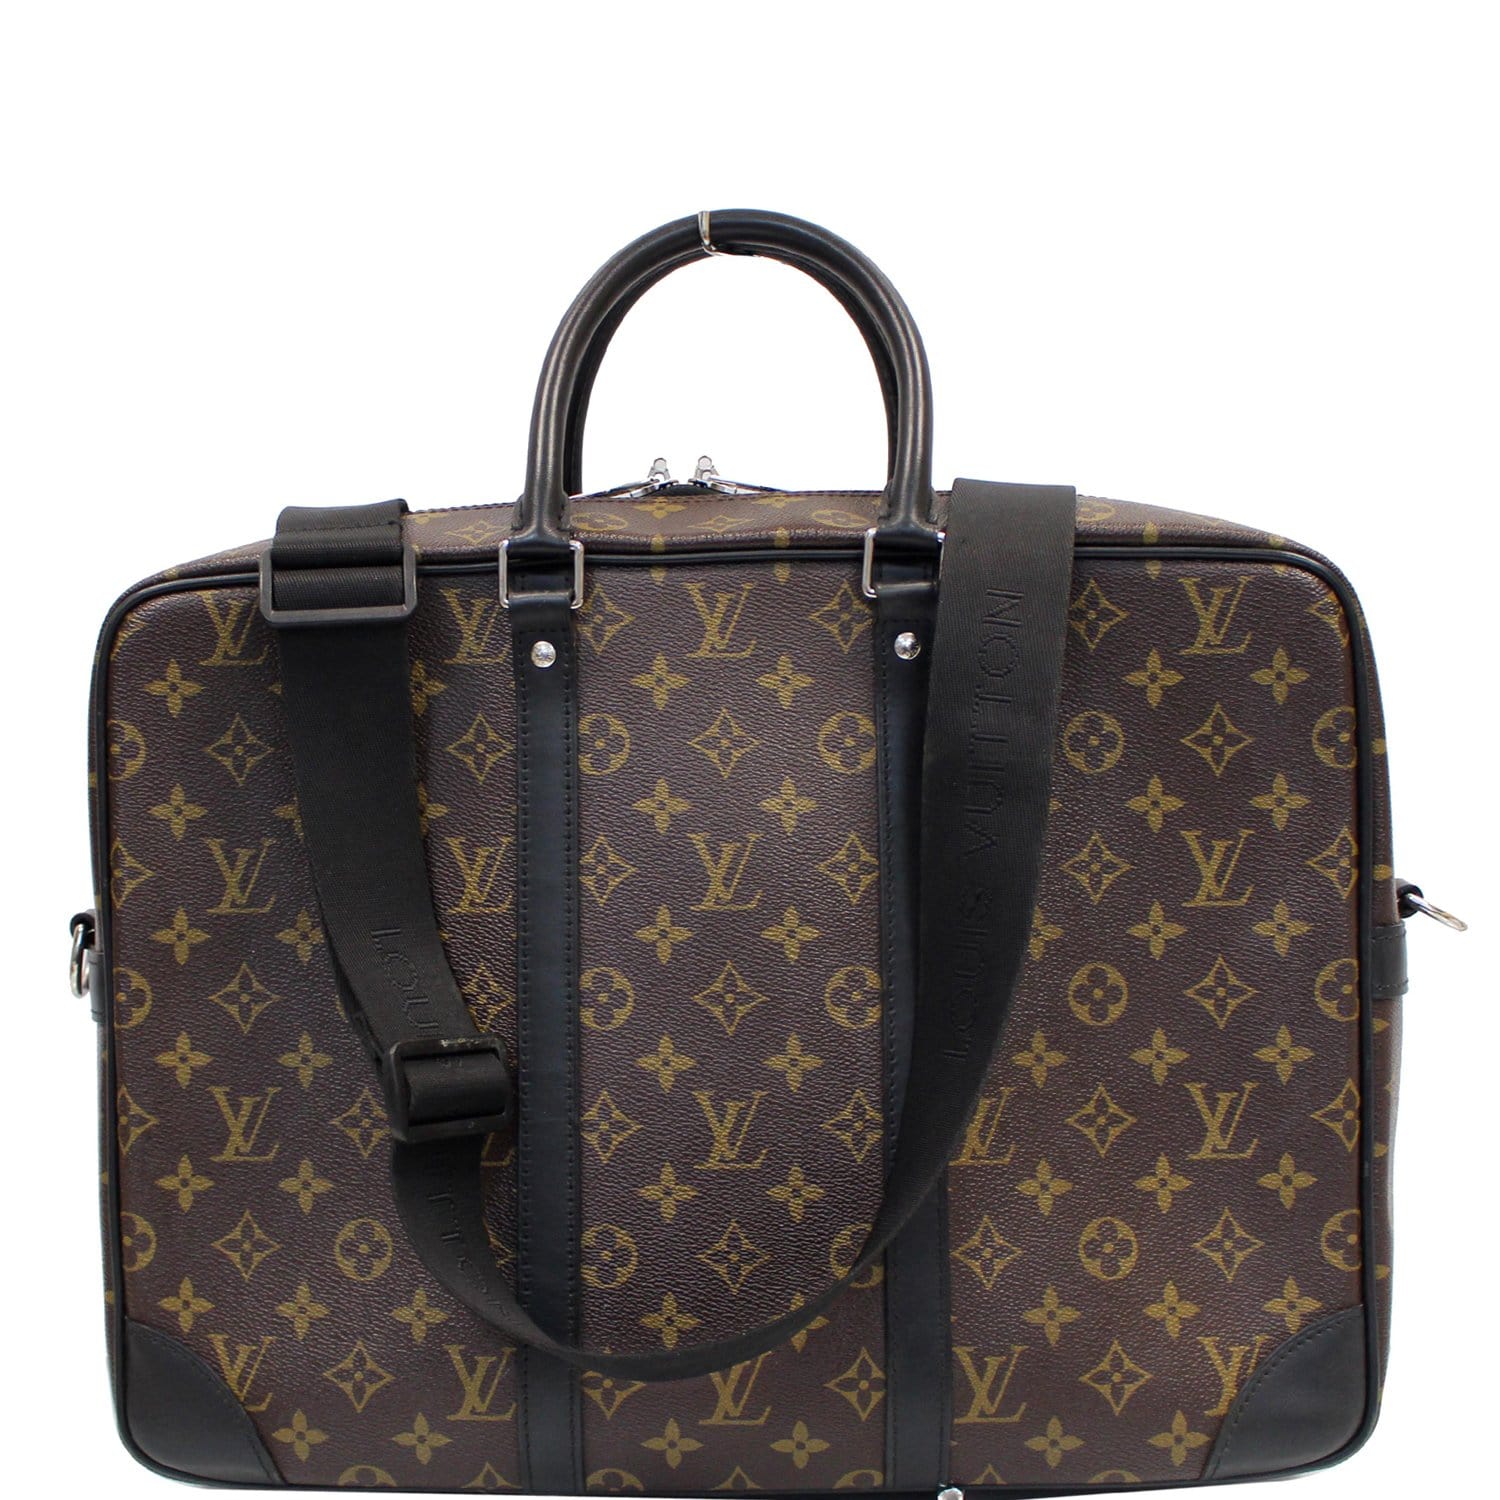 LOUIS VUITTON - Porte-Documents Voyage GM Review and